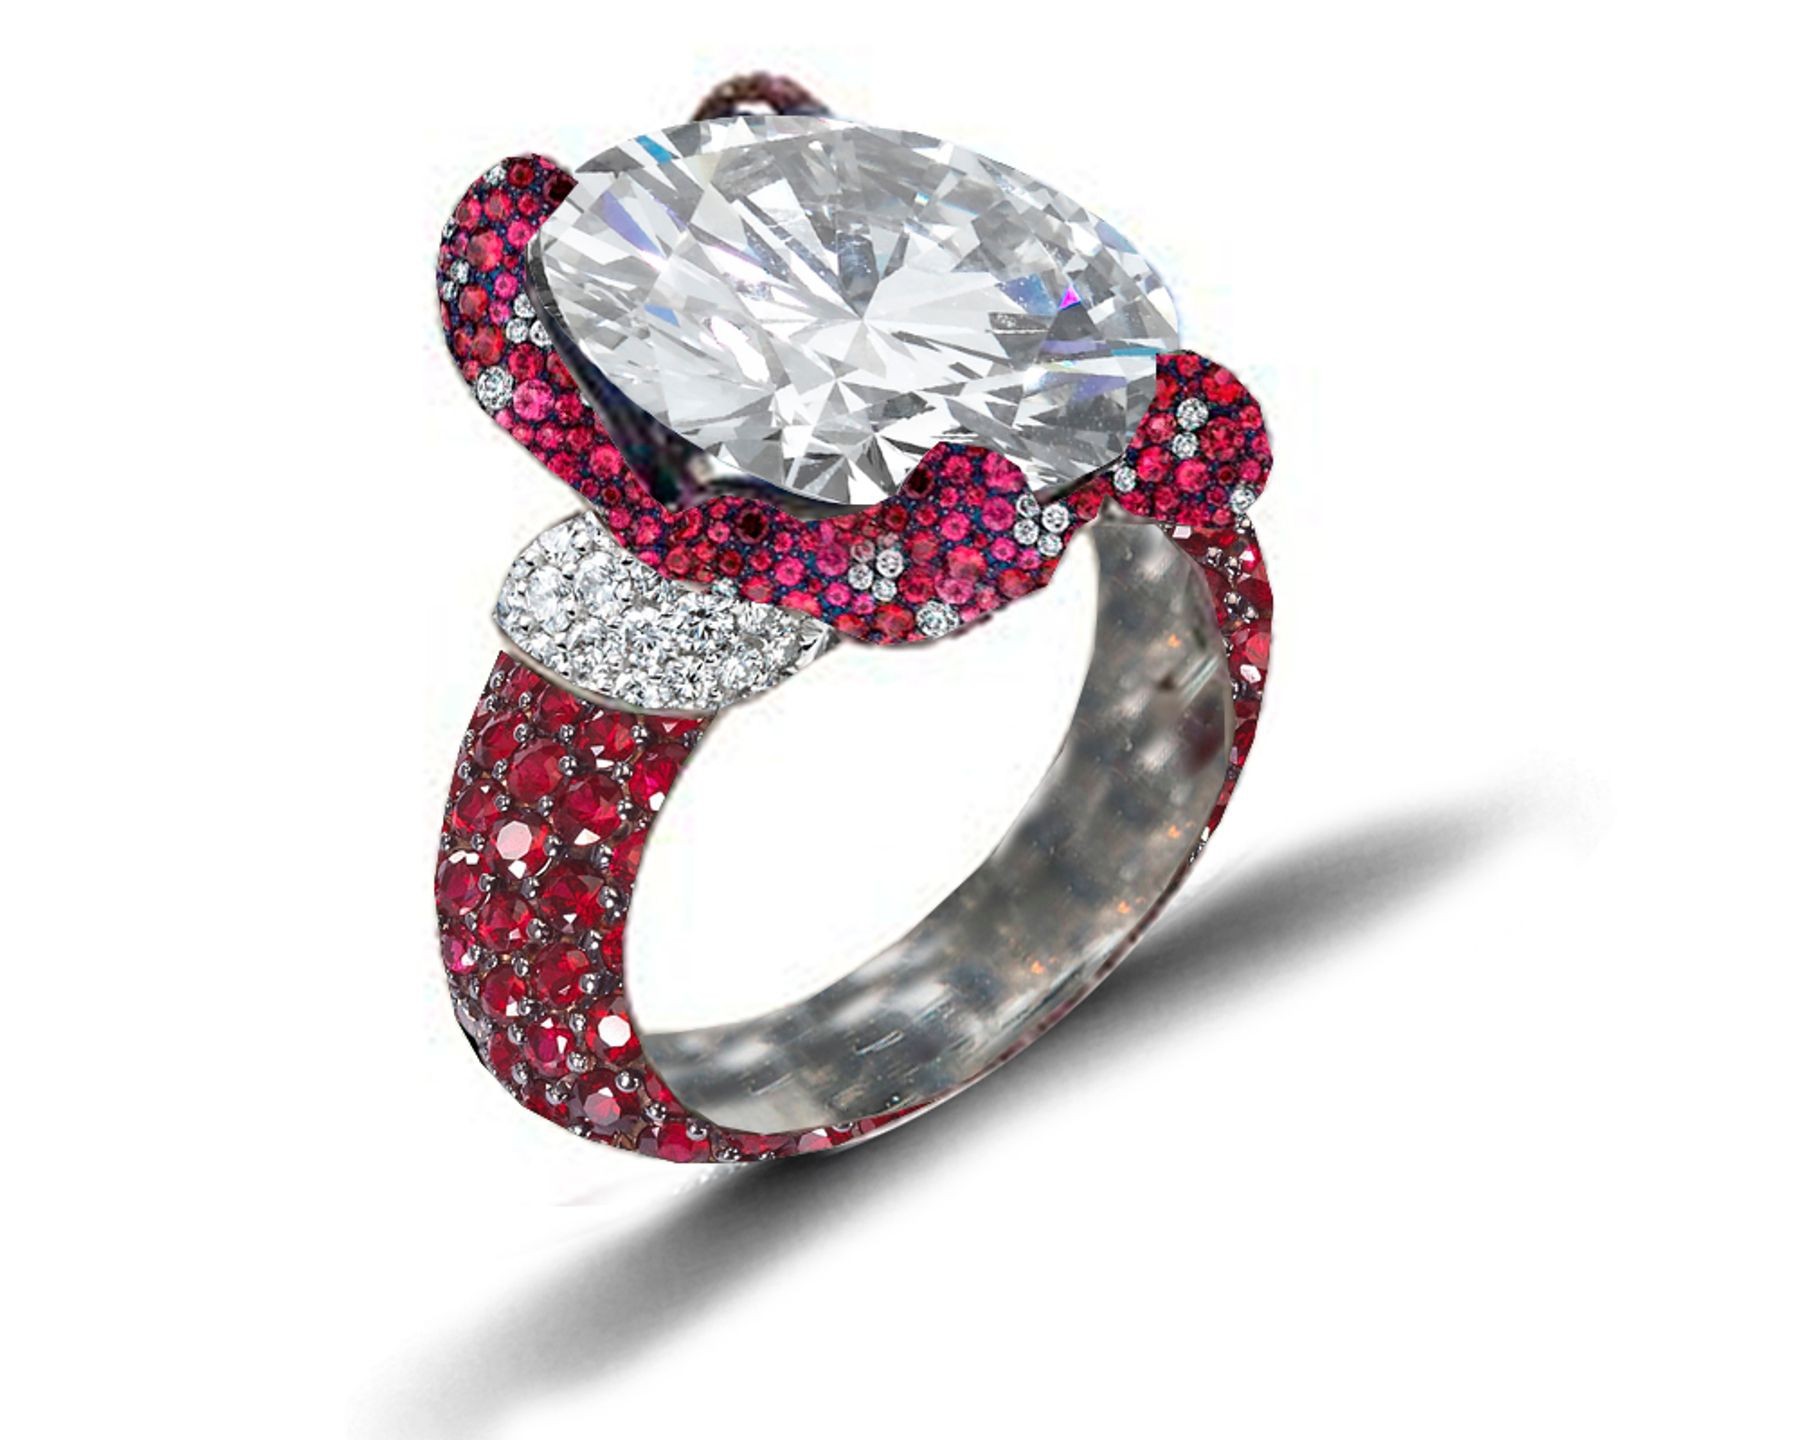 Ring with Round Diamond & Pave Set Rubies & White Diamonds in Gold or Platinum